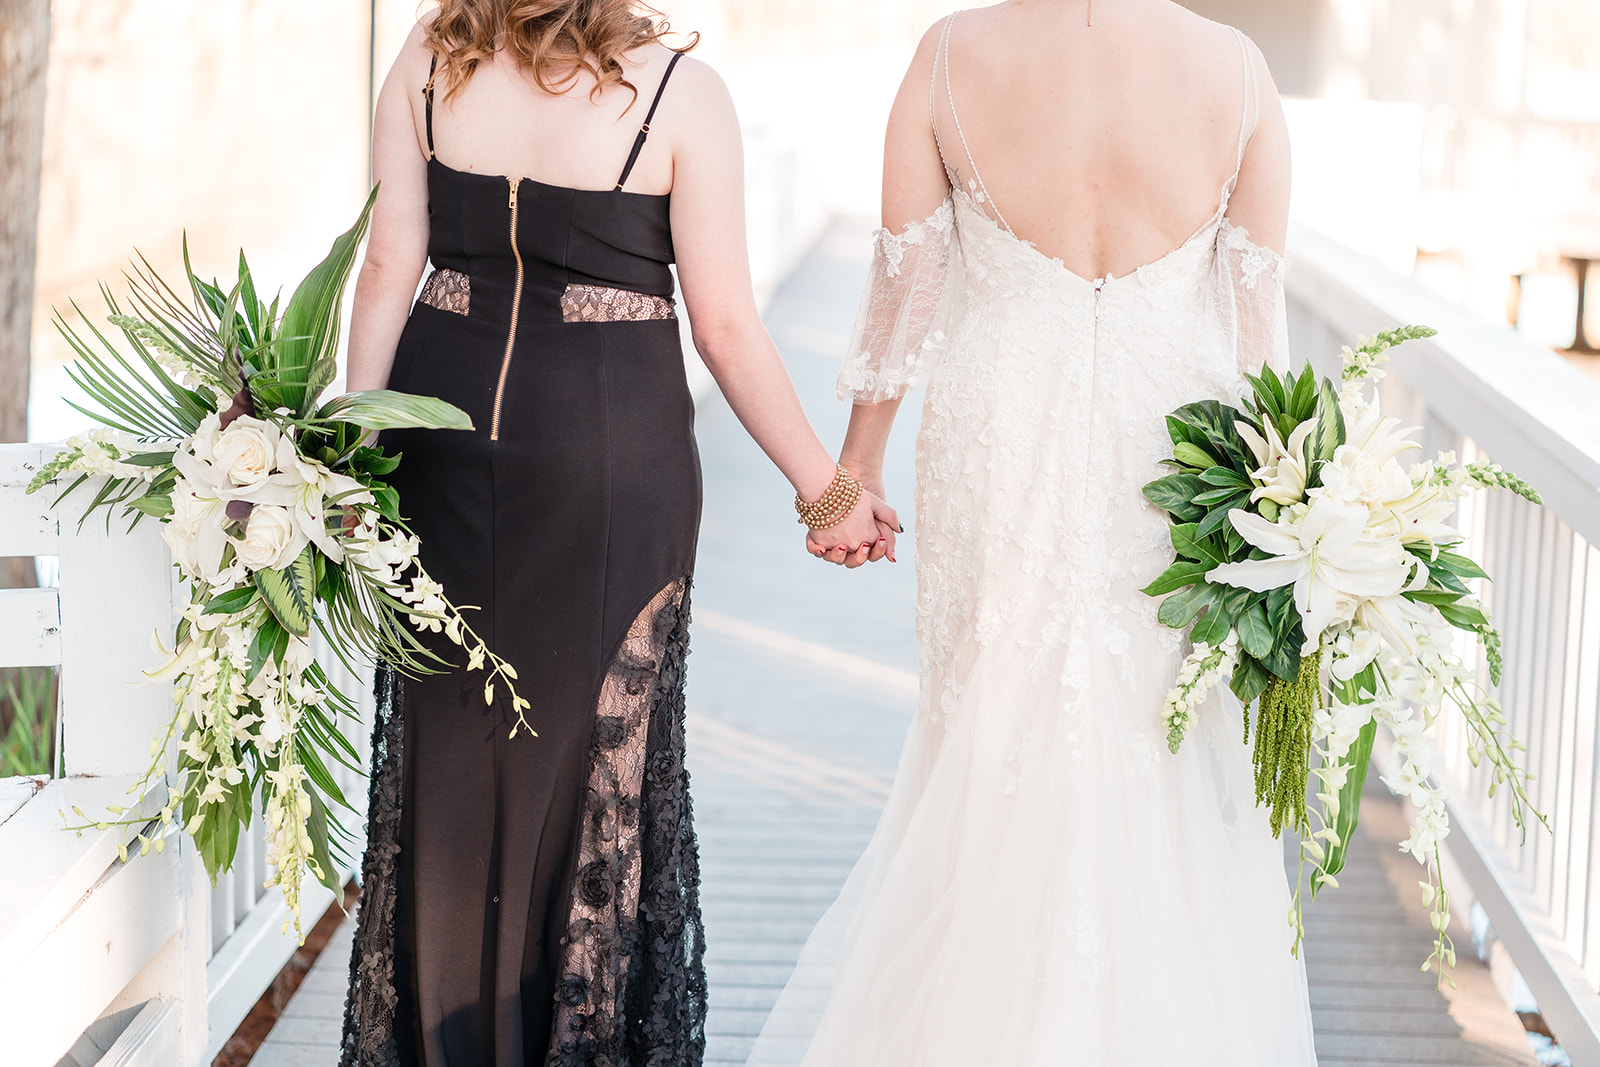 A close-up of two brides holding hands on a bridge, each with a bouquet of flowers, one in a black dress and the other in a white dress.